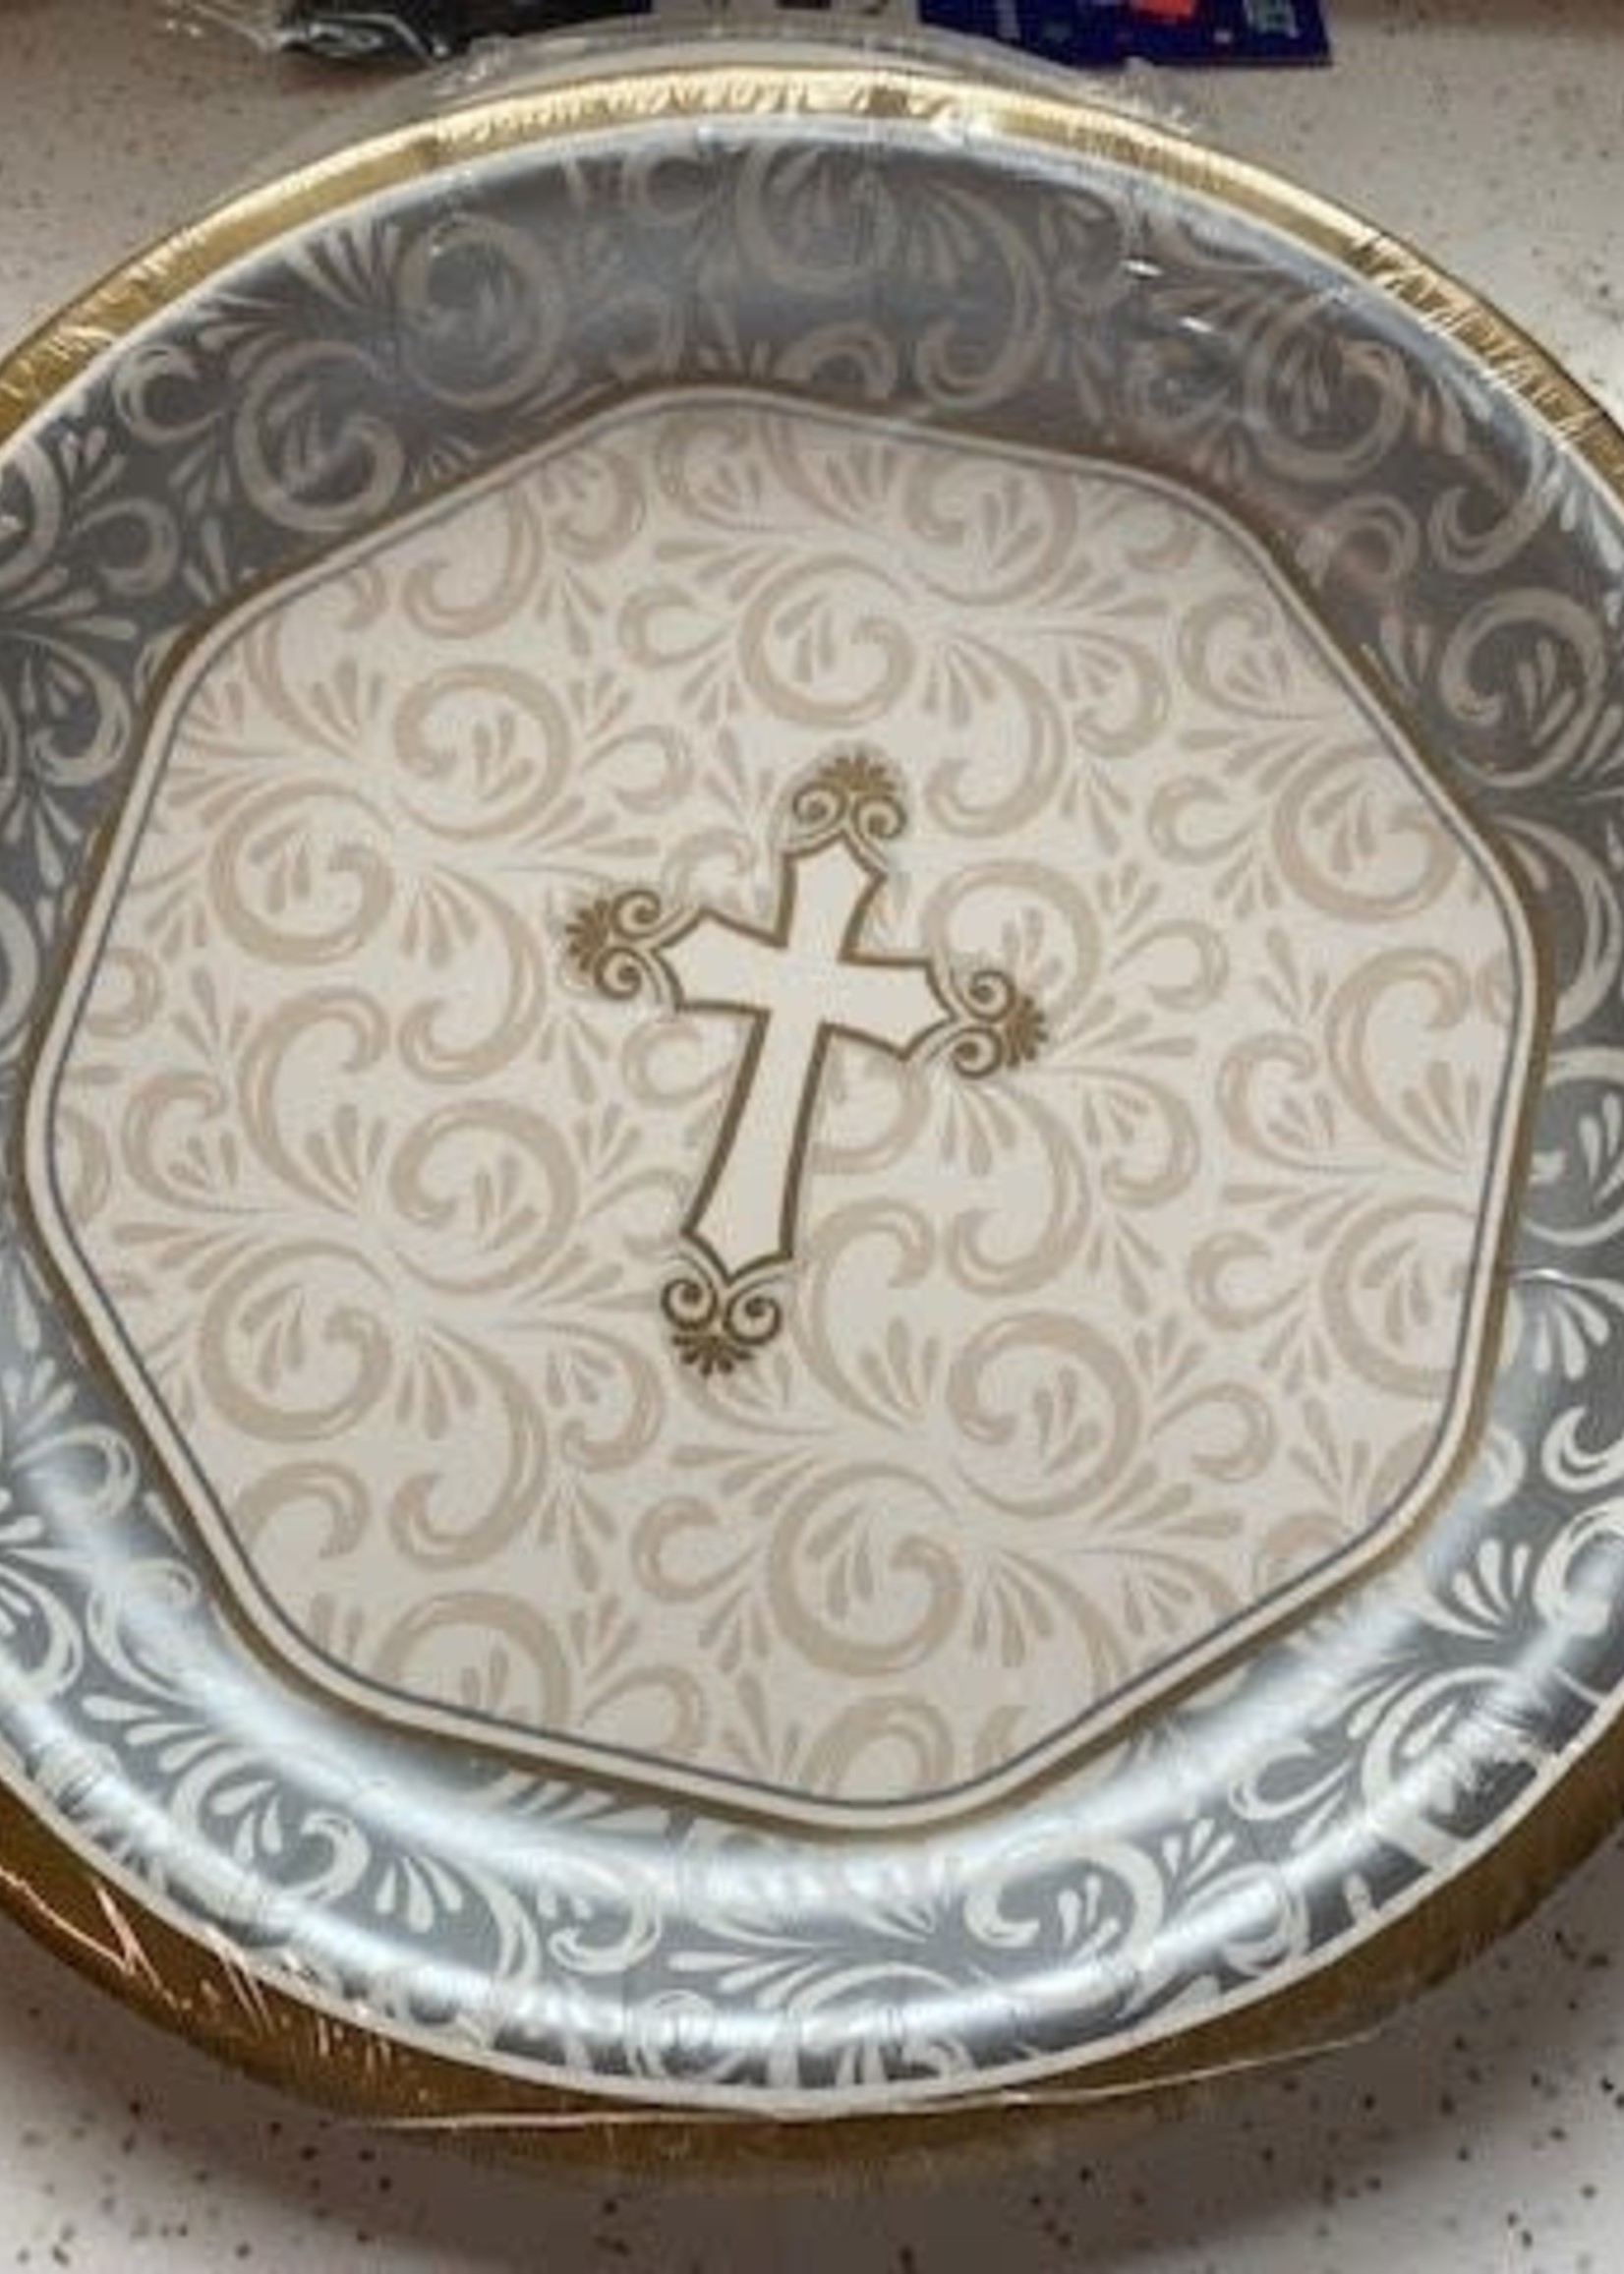 DIVINTY PLATE